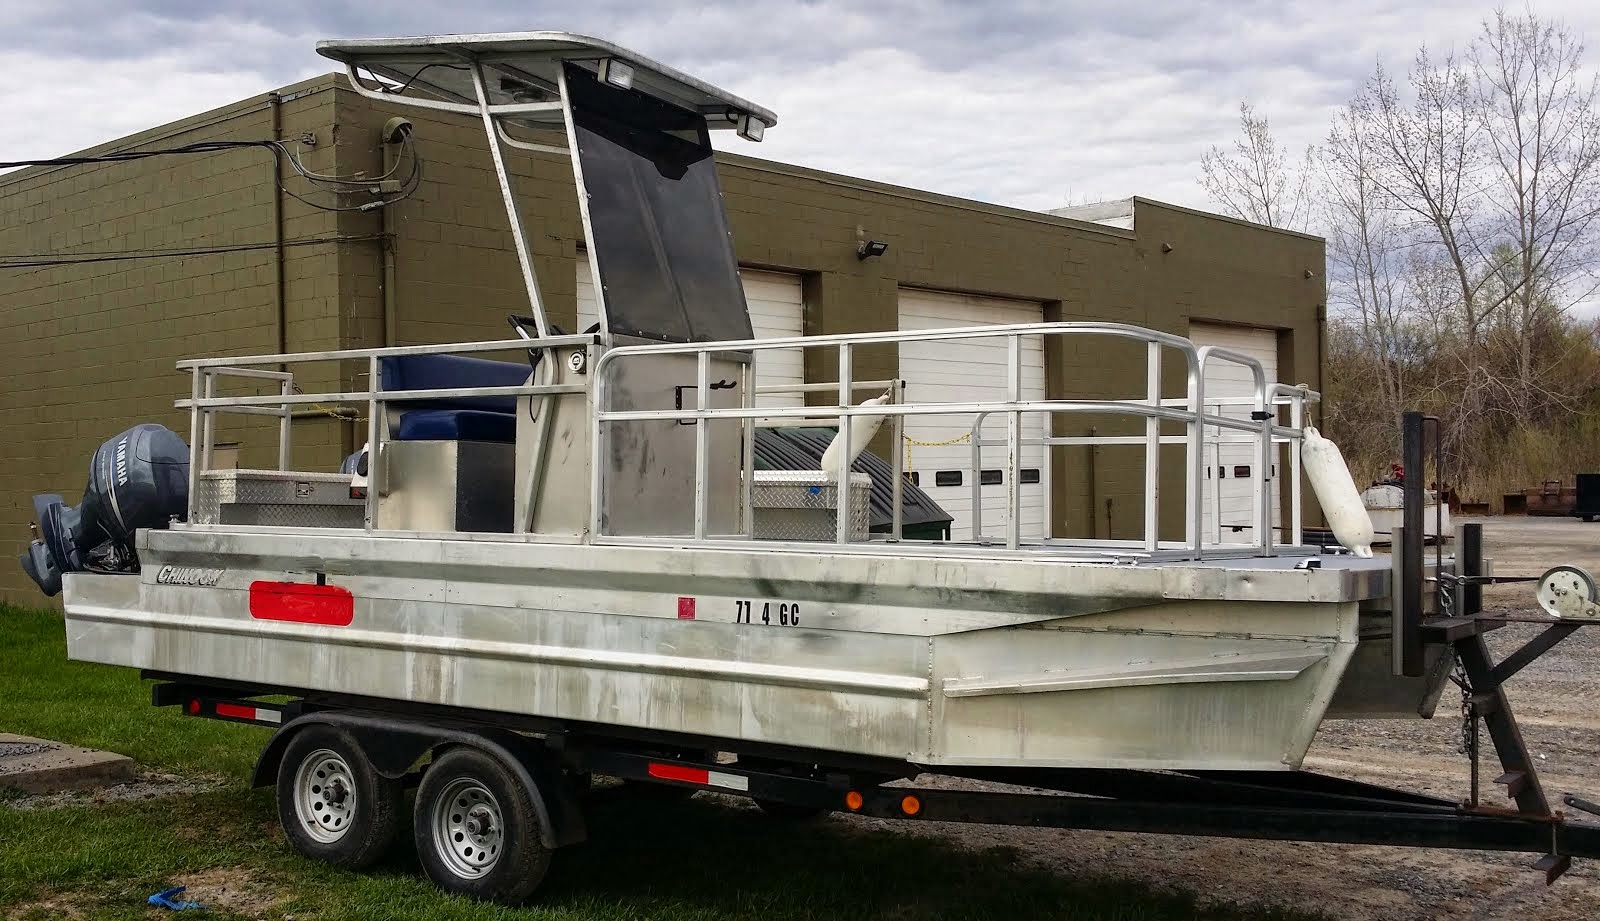 fs supply co: 28' x 8' rescue/work pontoon boat for sale